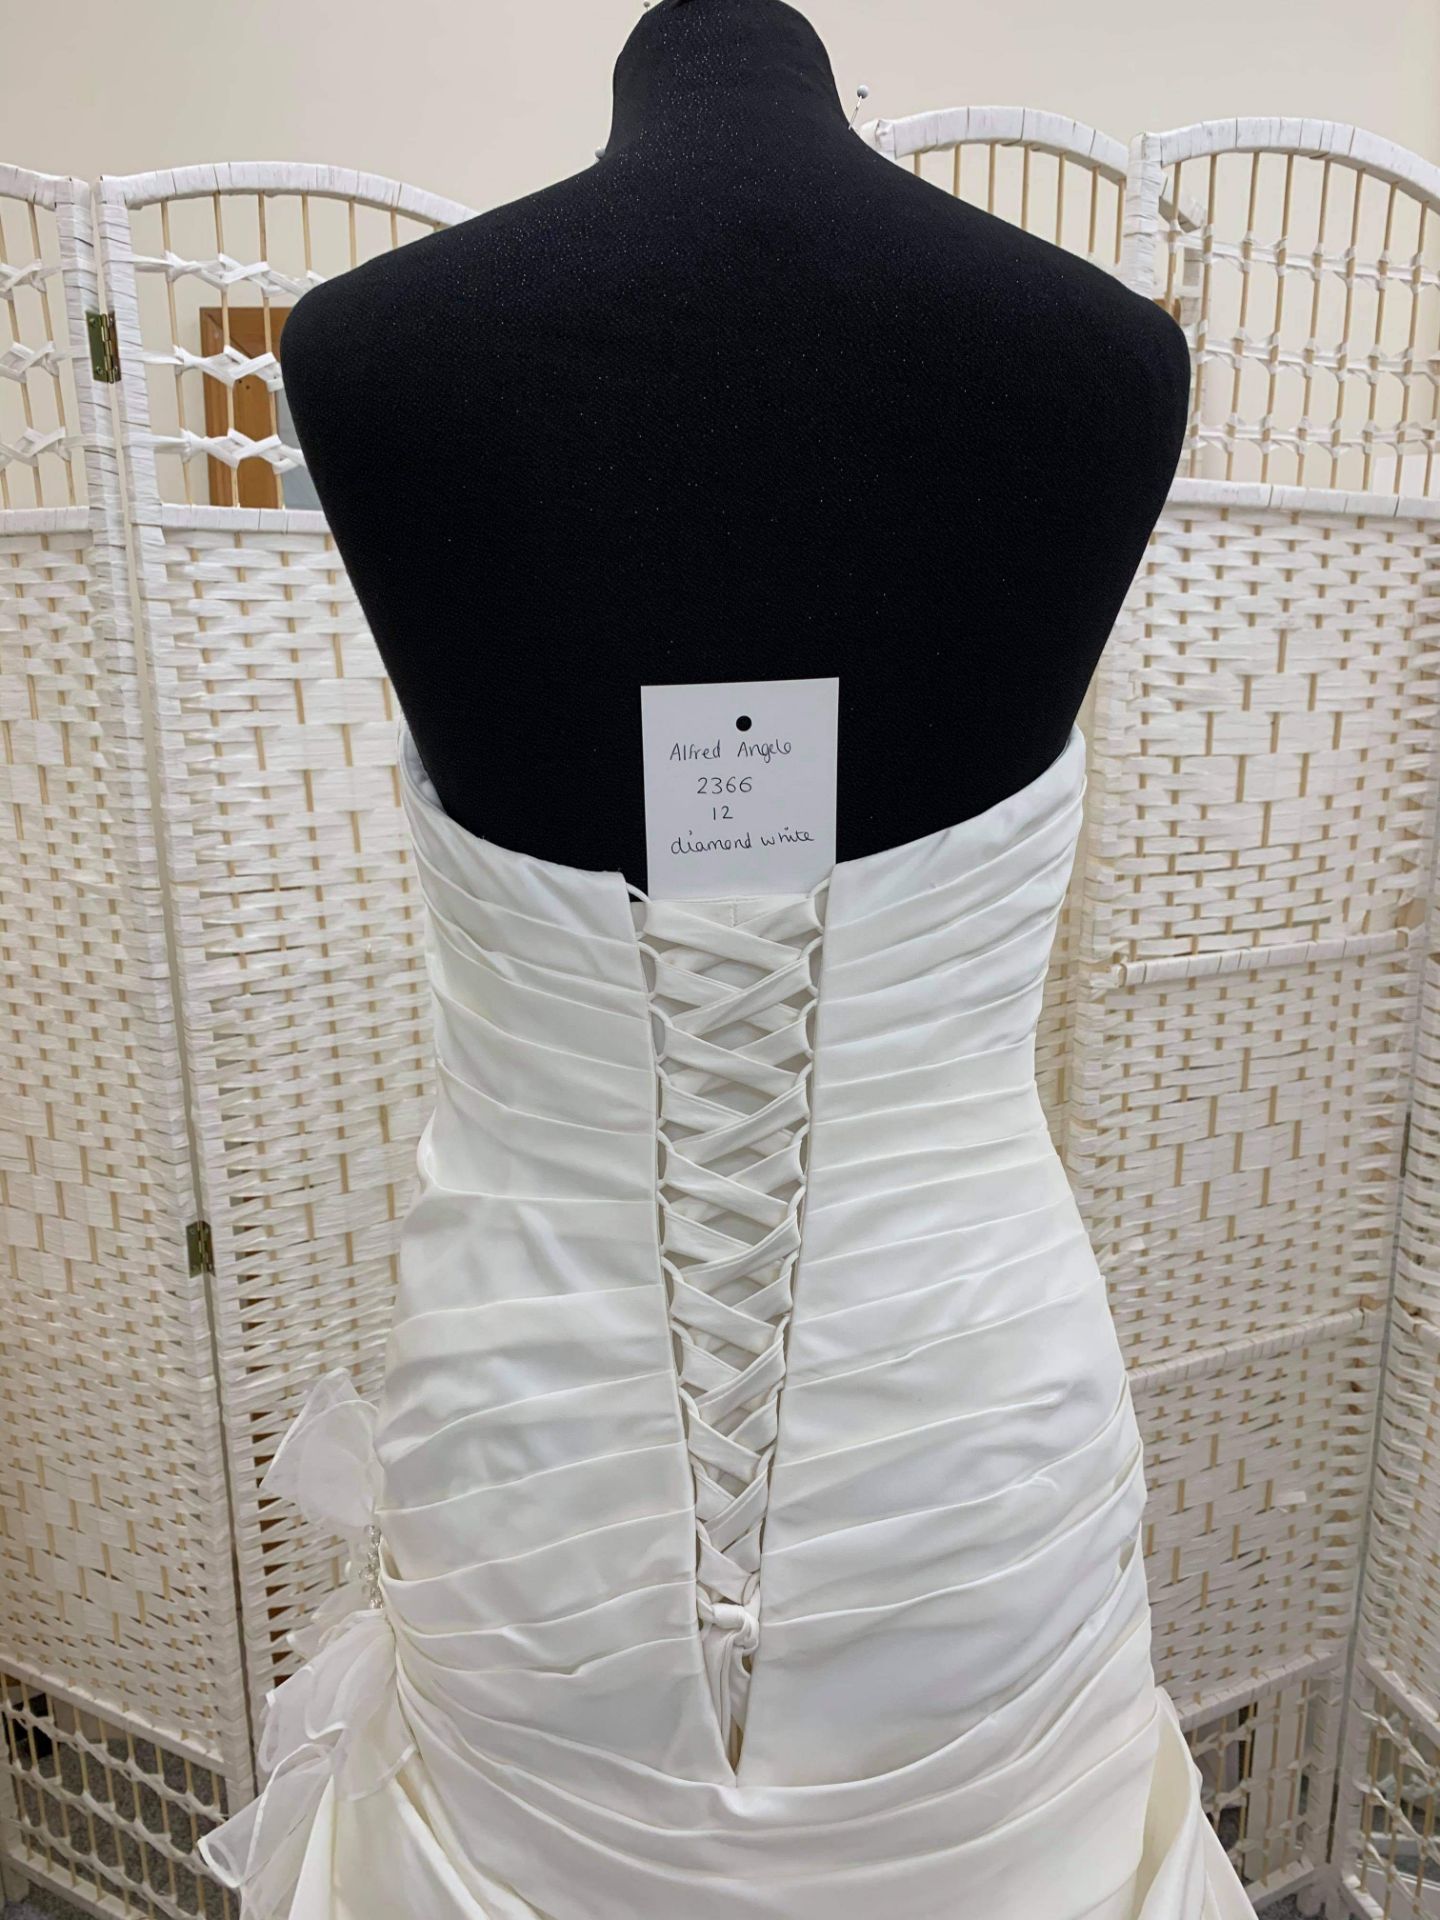 Alfred Angelo Wedding Gown Size 12 - Image 2 of 2